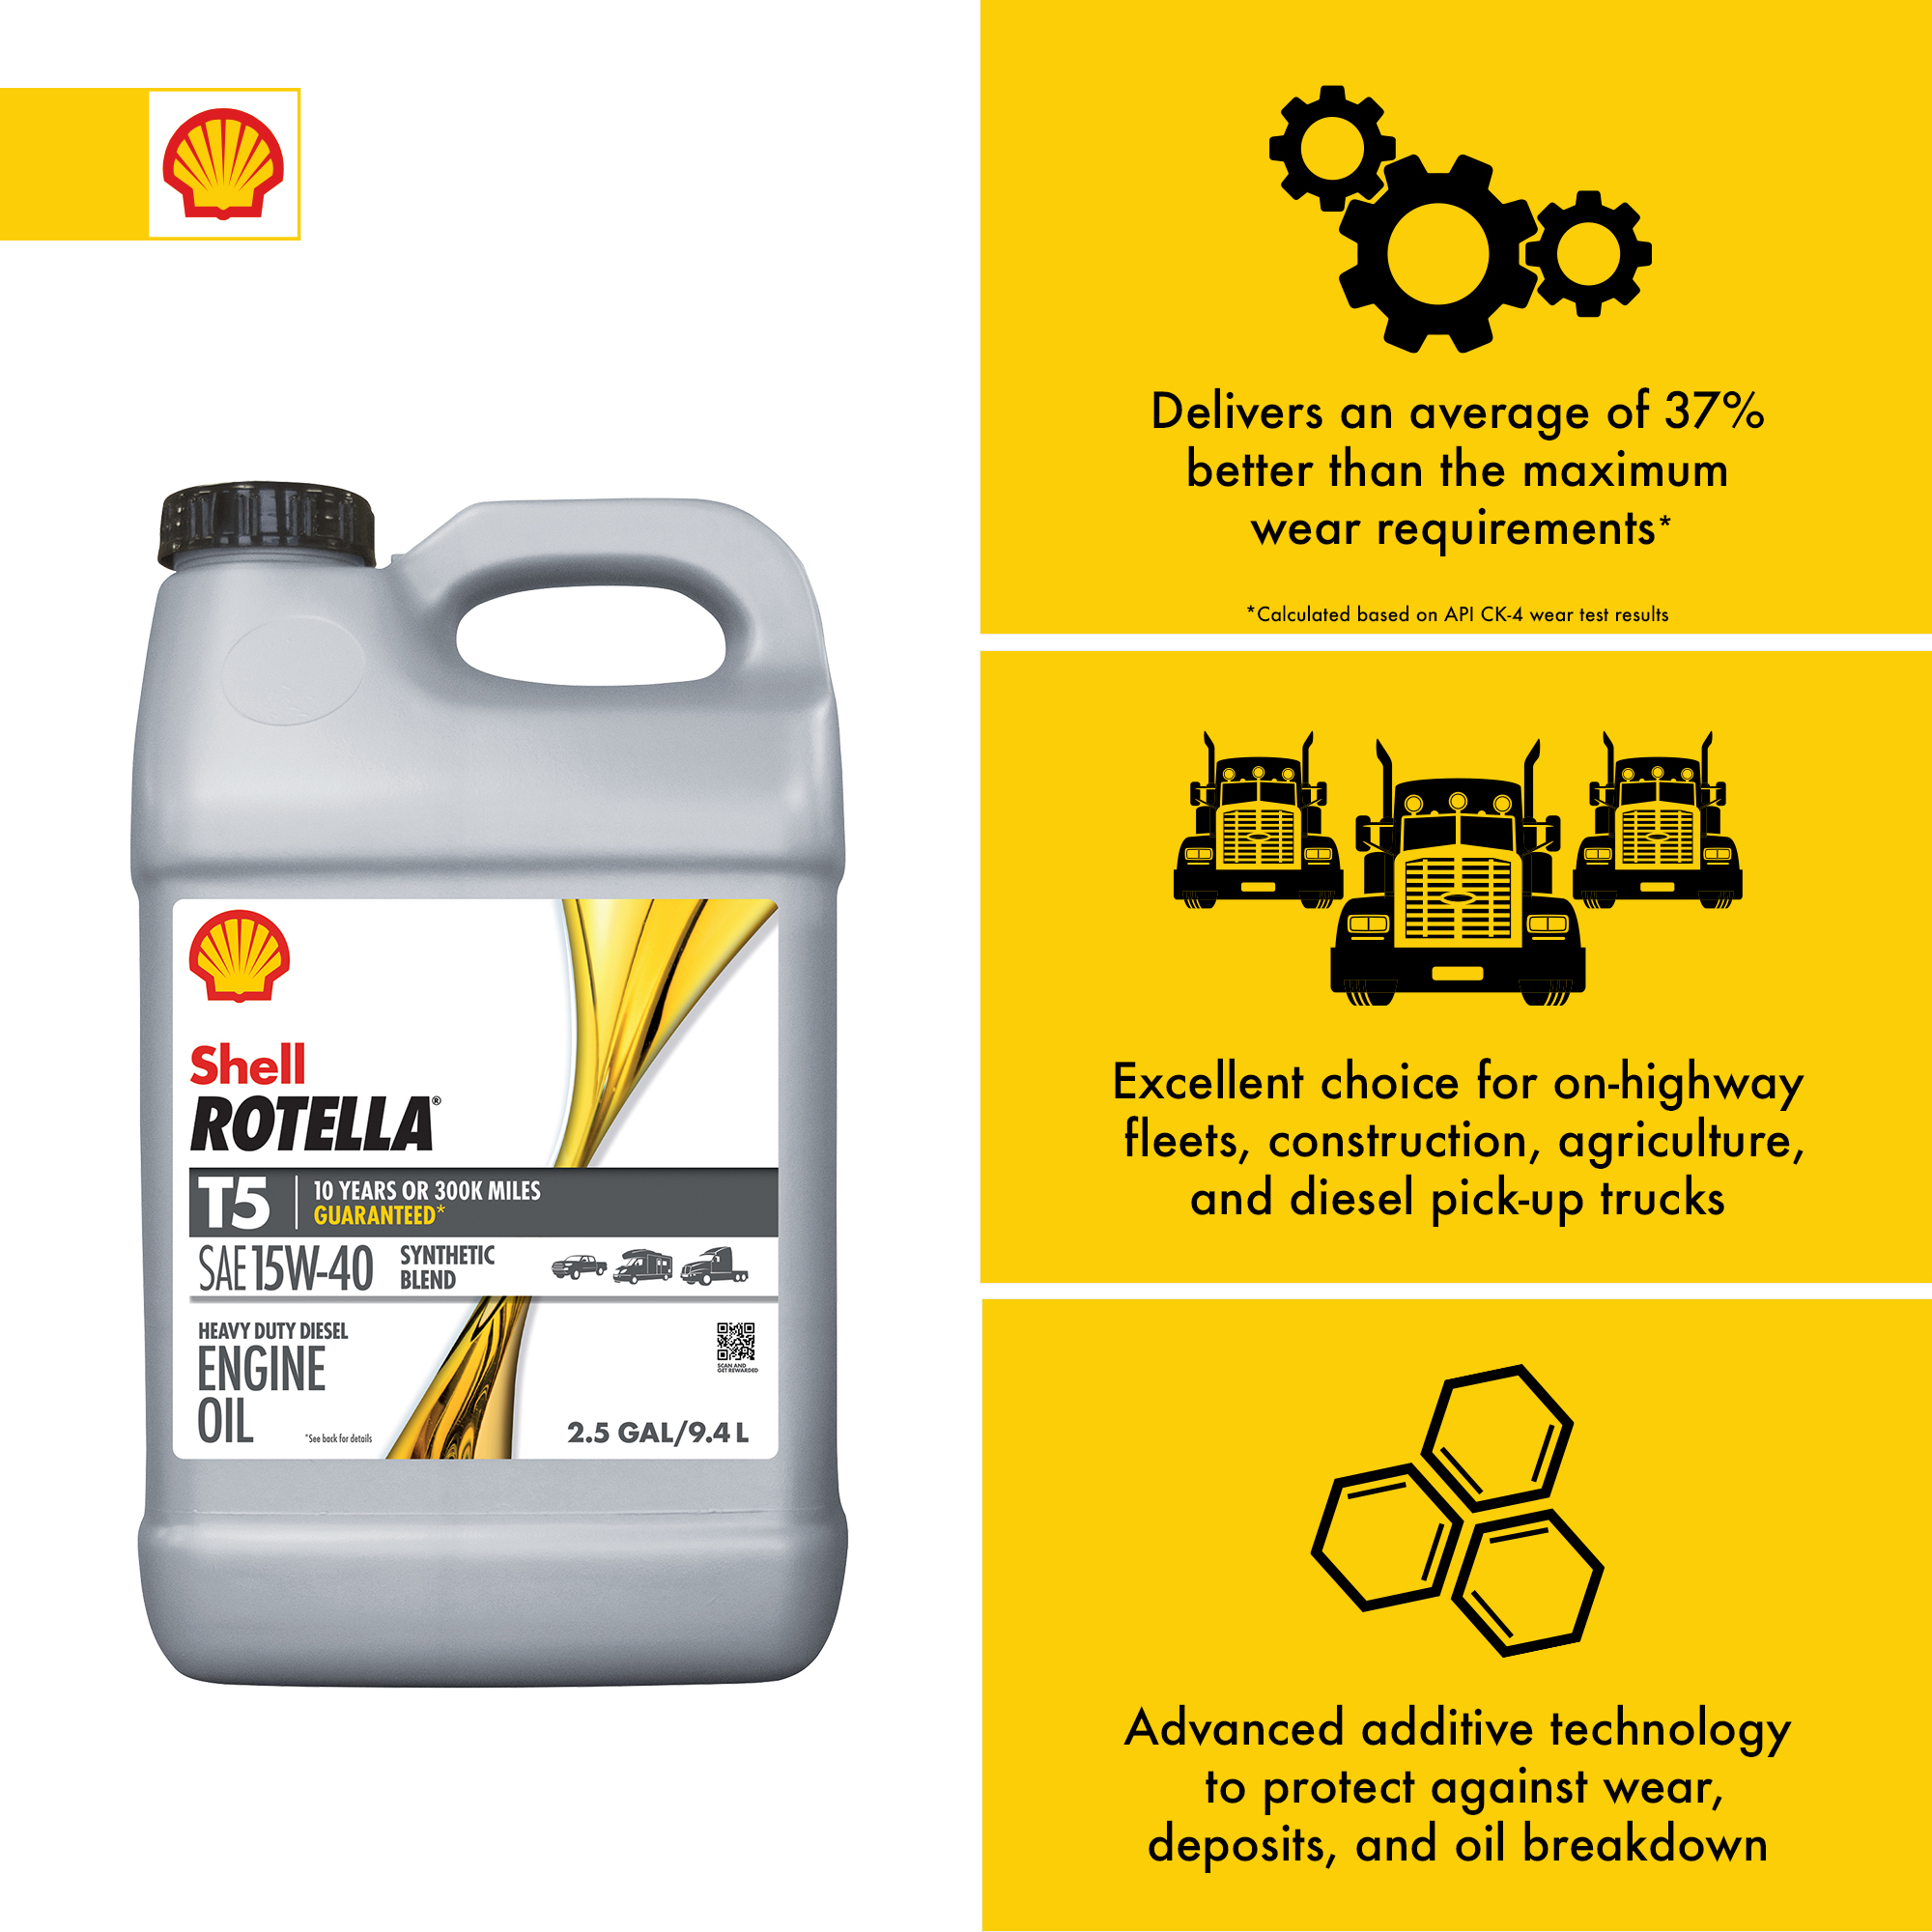 Shell Rotella T5 Synthetic Blend 15W-40 Diesel Engine Oil, 2.5 Gallon - image 3 of 9